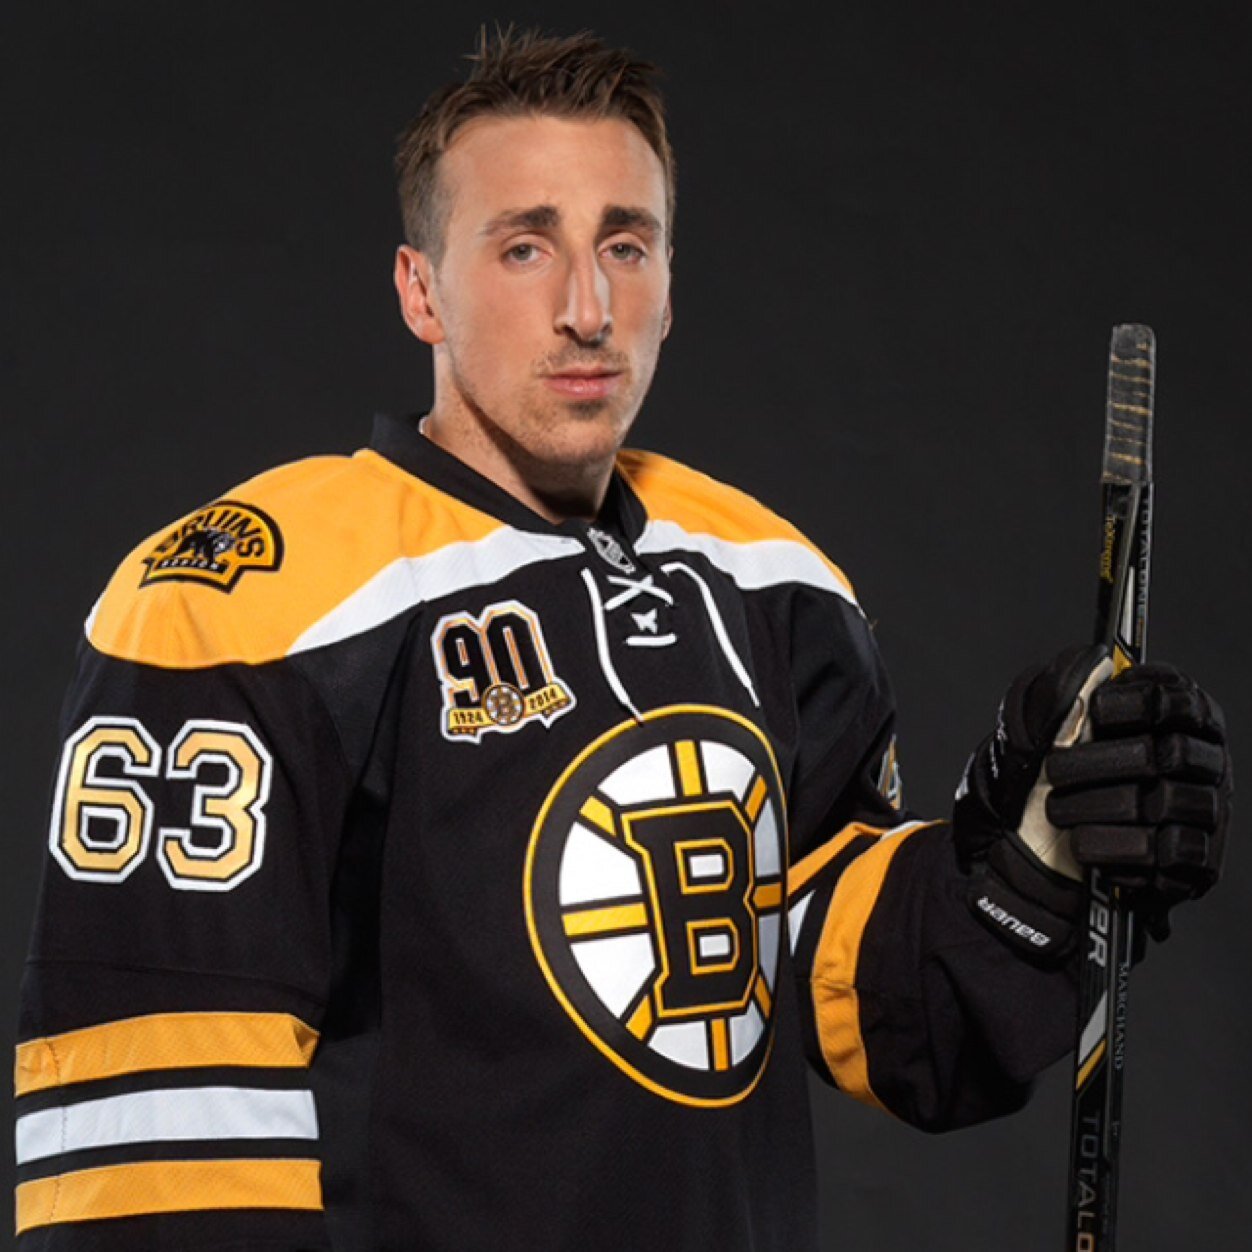 Canadian professional ice hockey player Brad Marchand fined $10,000 US for dangerous trip1252 x 1252